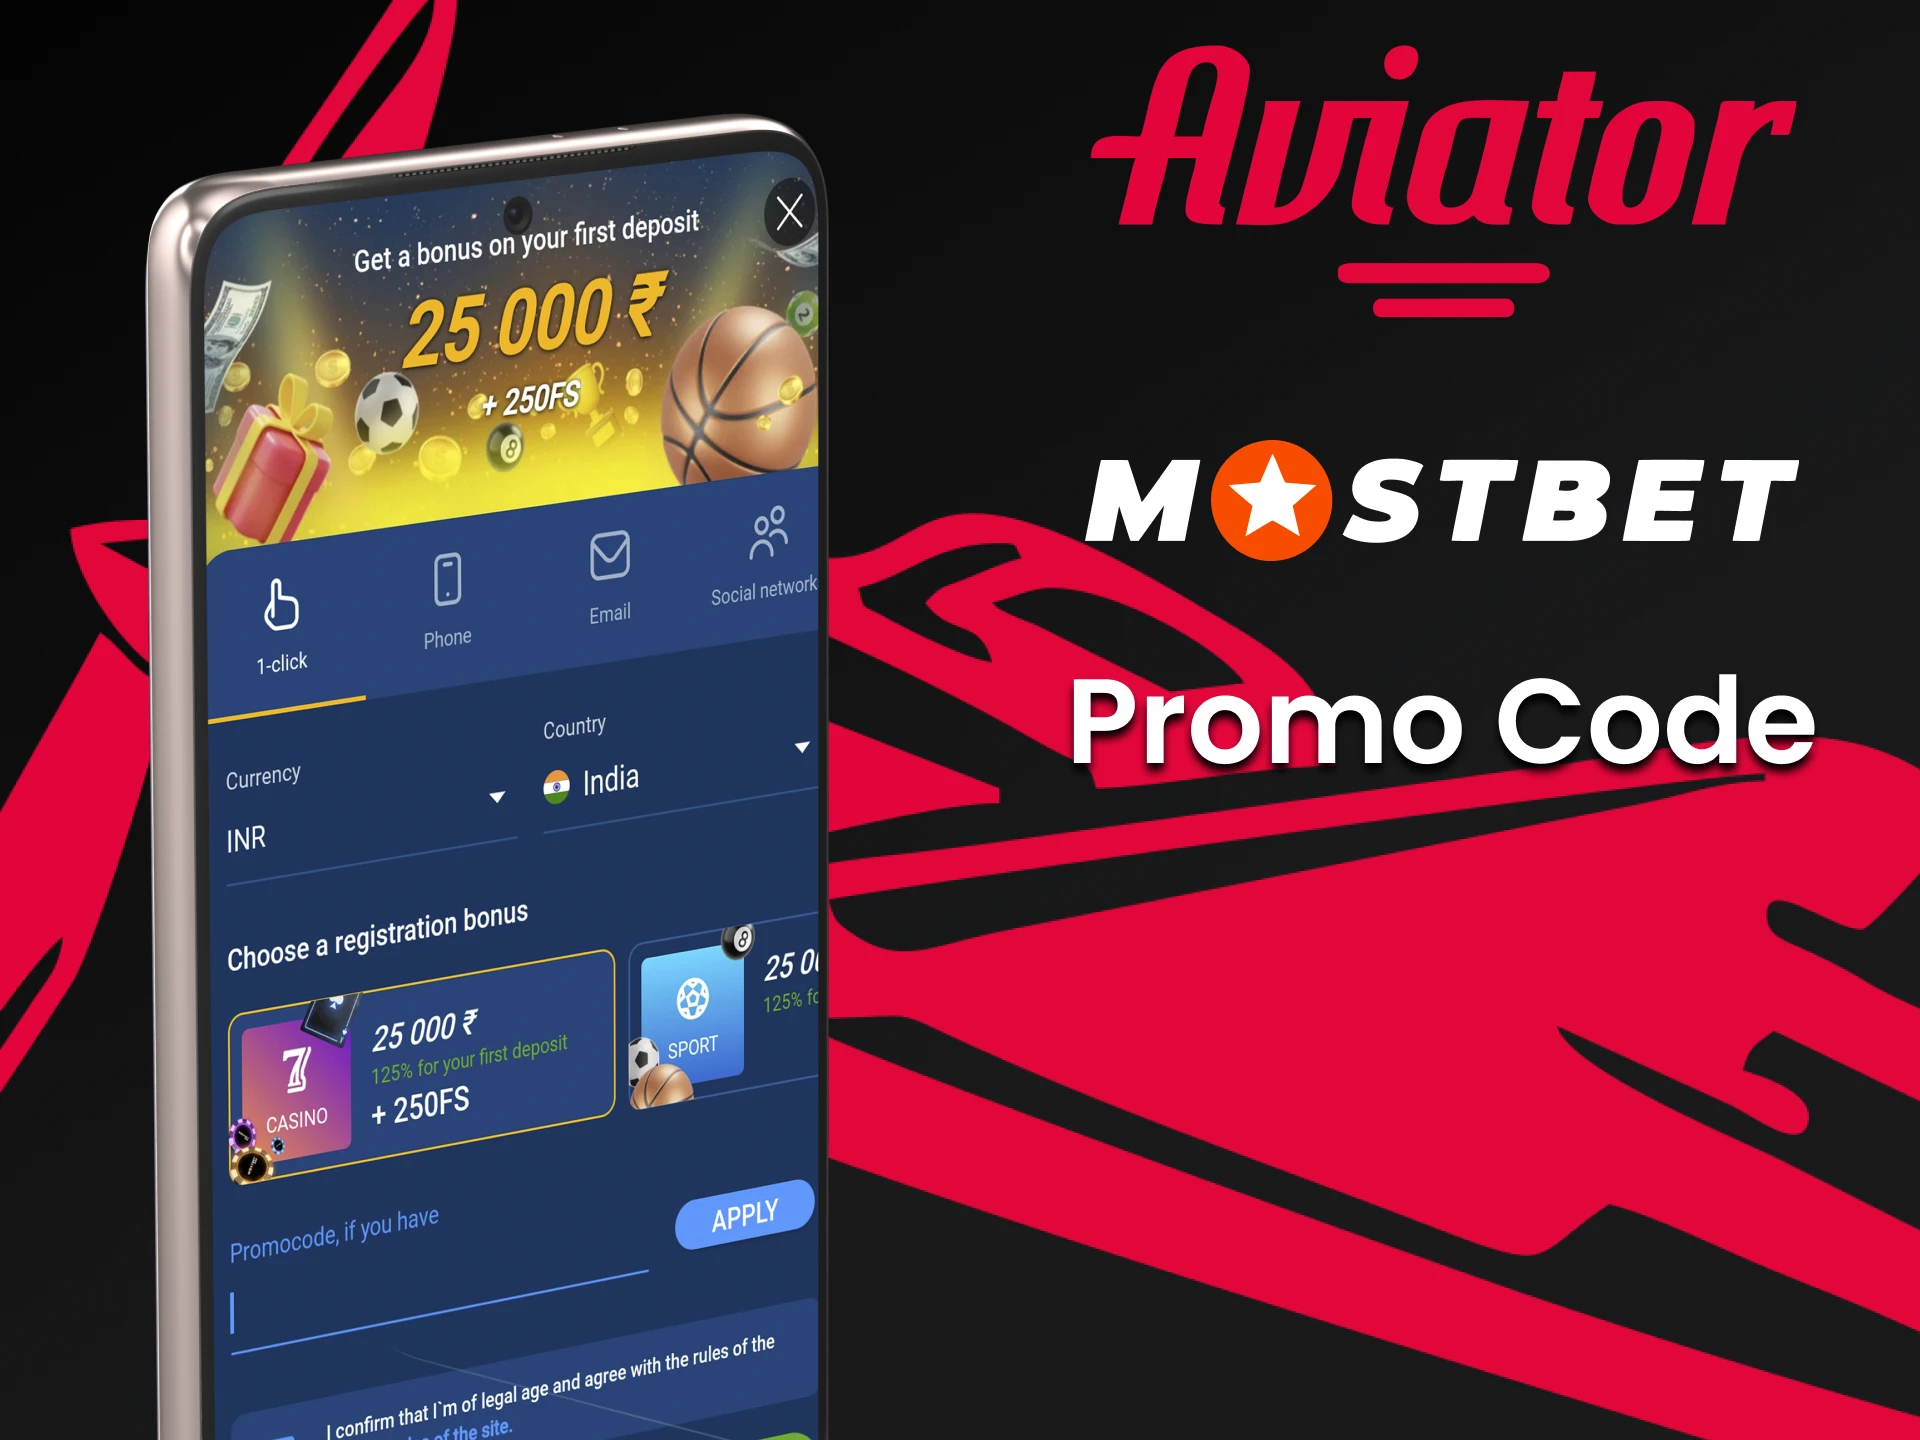 Use promo code from Mostbet.